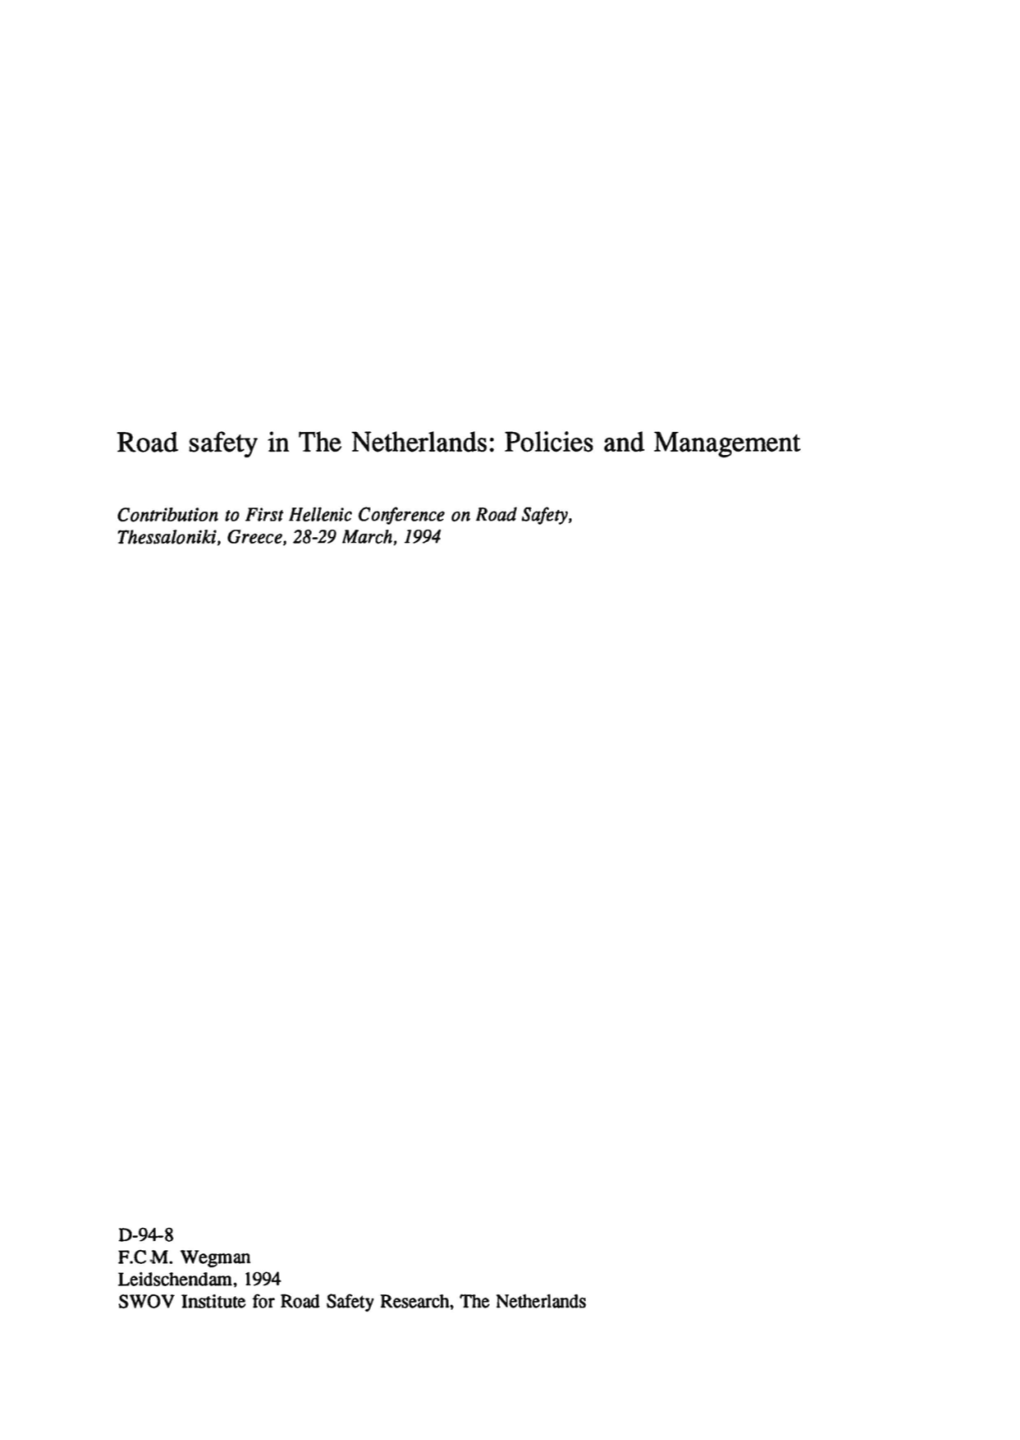 Road Safety in the Netherlands: Policies and Management